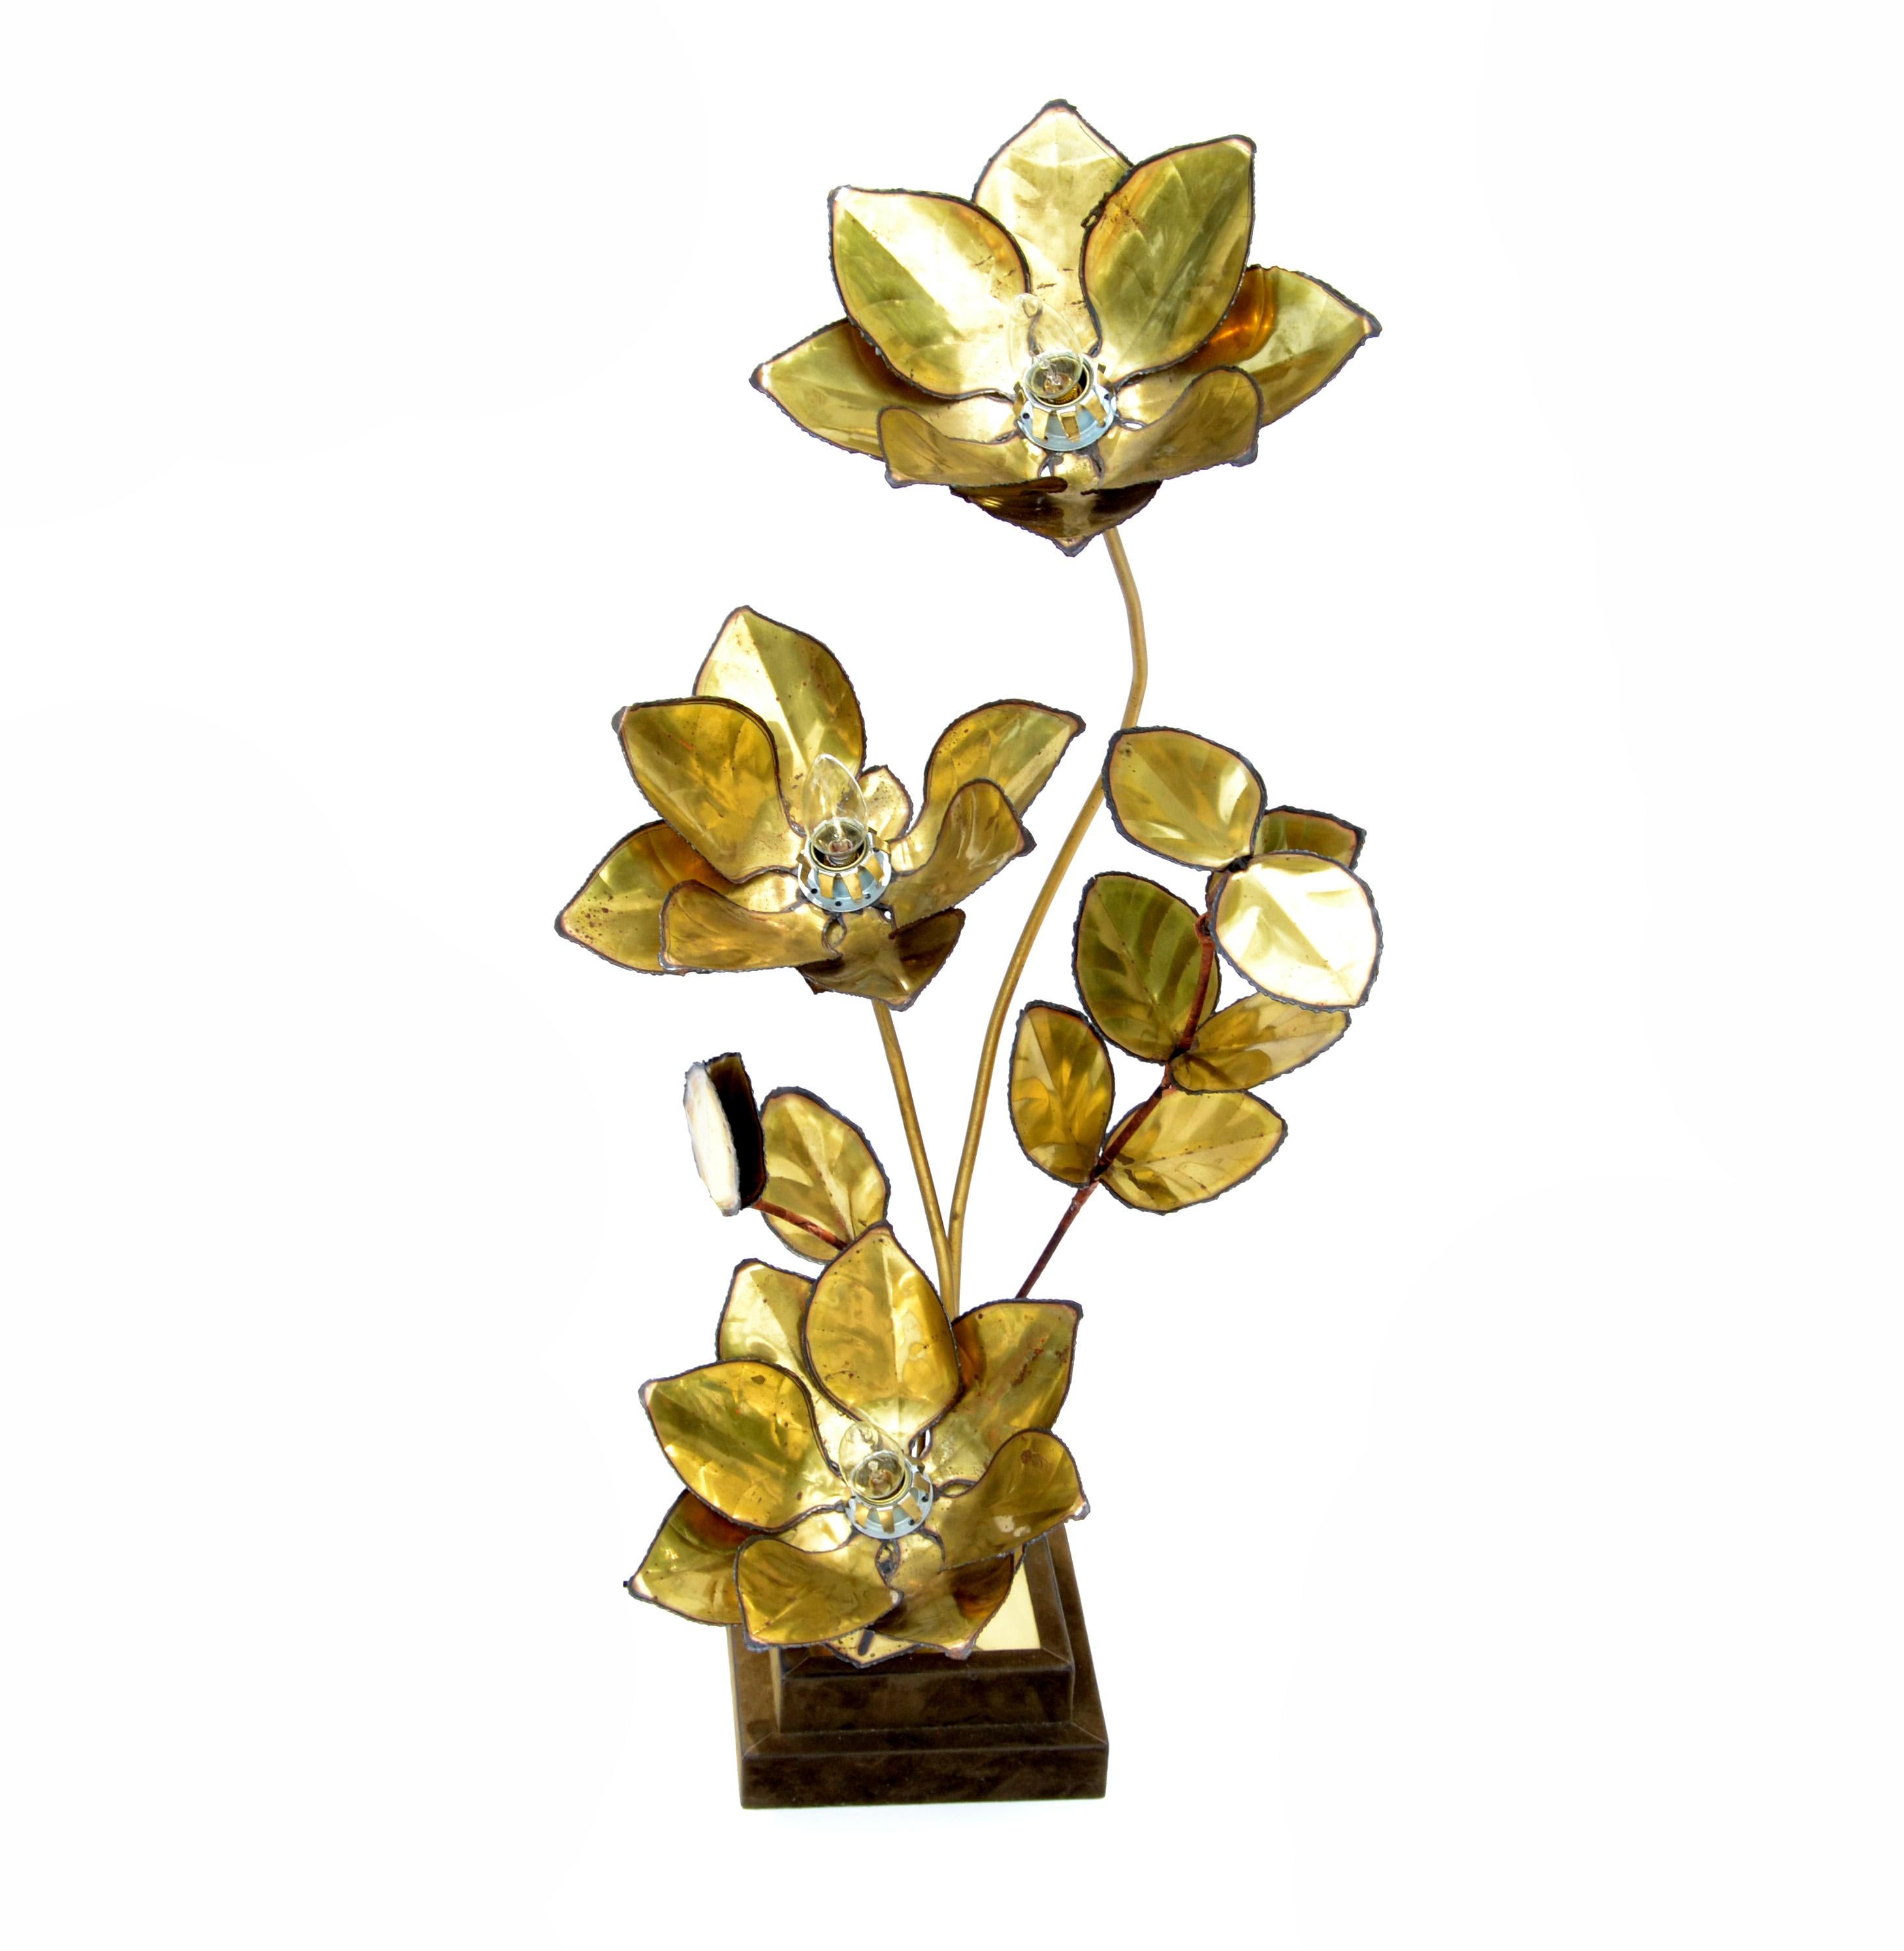 Maison Jansen French 3-light cut brass flower table lamp on a brown velvet covered base.
Uses 3 light bulb with max. 40 watts 
Great as a decorative object, stunner done craftsmanship.